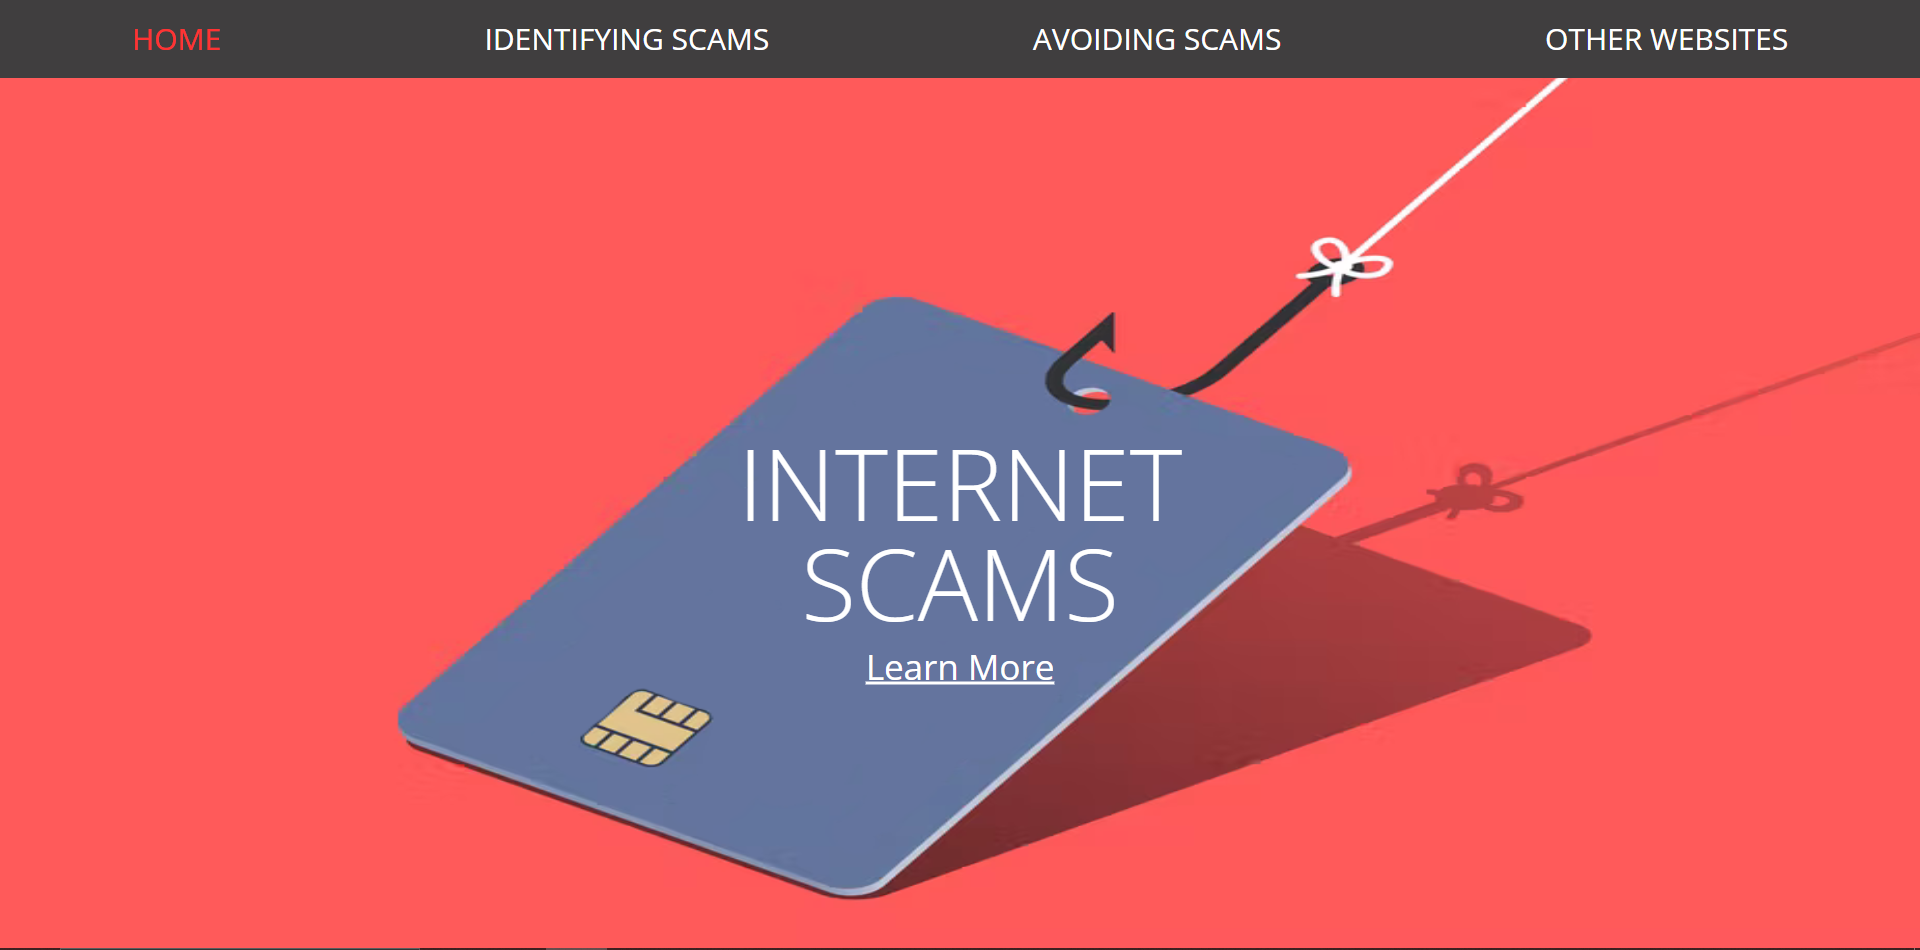 Internet scams on a red background with a fishing hook.